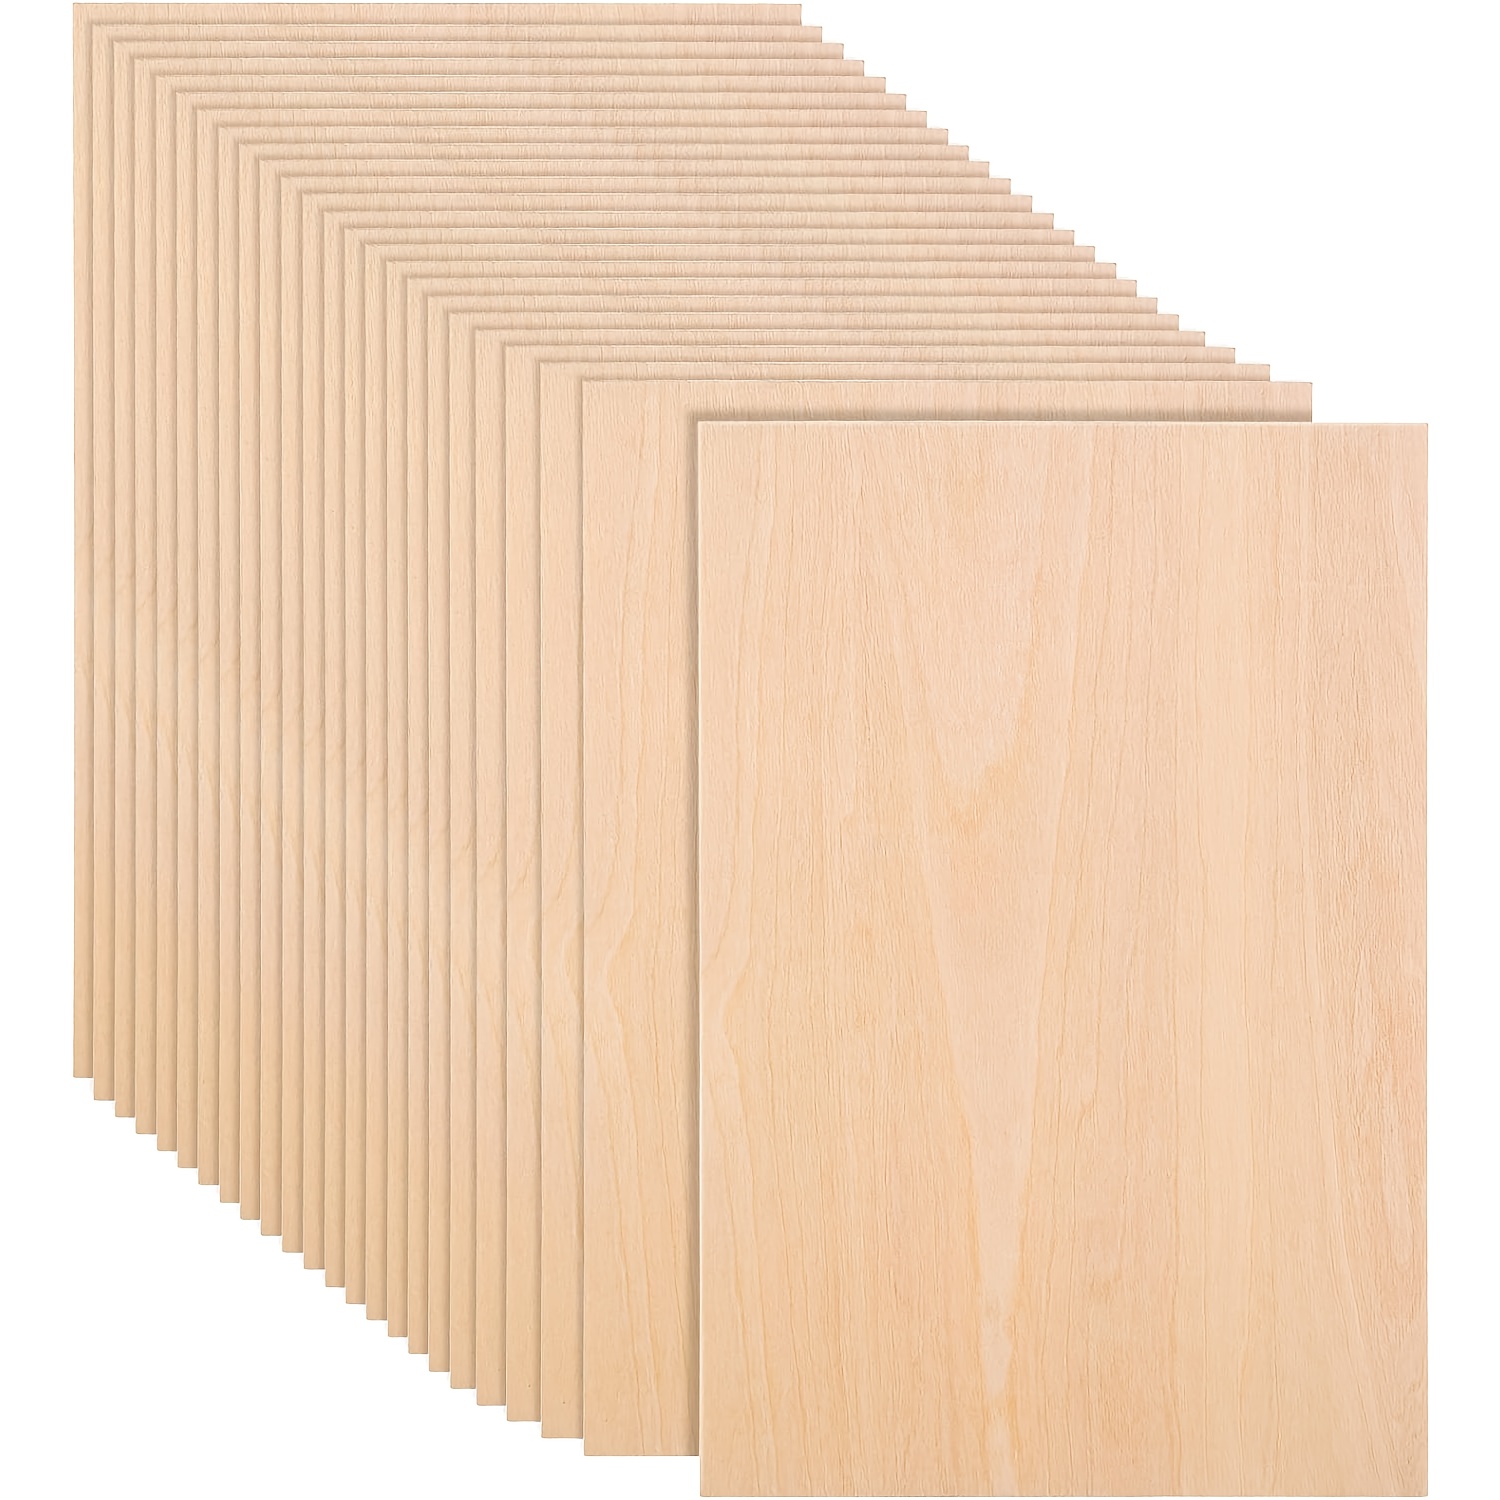 12 Pack 1/8 inch Basswood Sheets 12x12 Square 3mm Plywood Sheets Unfinished Wood Sheets Bass Wood Plywood for Laser Cutting Crafts Mini House